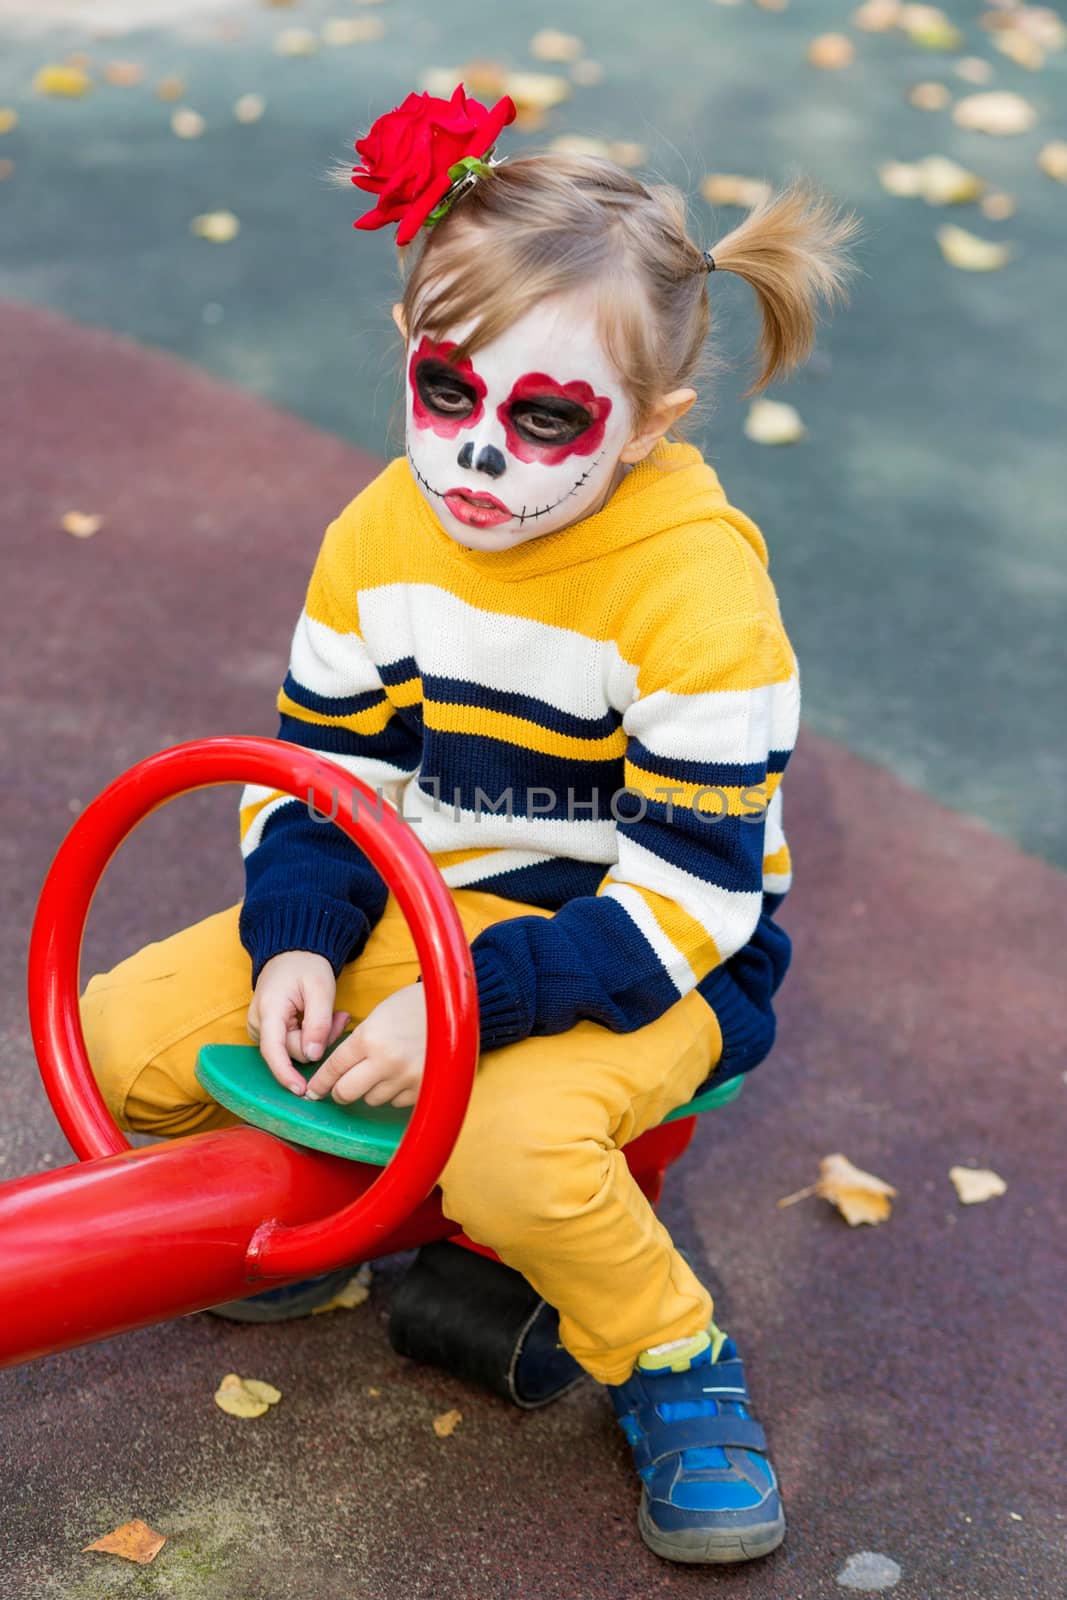 A little girl with Painted Face, rides on a swing in the playground by galinasharapova